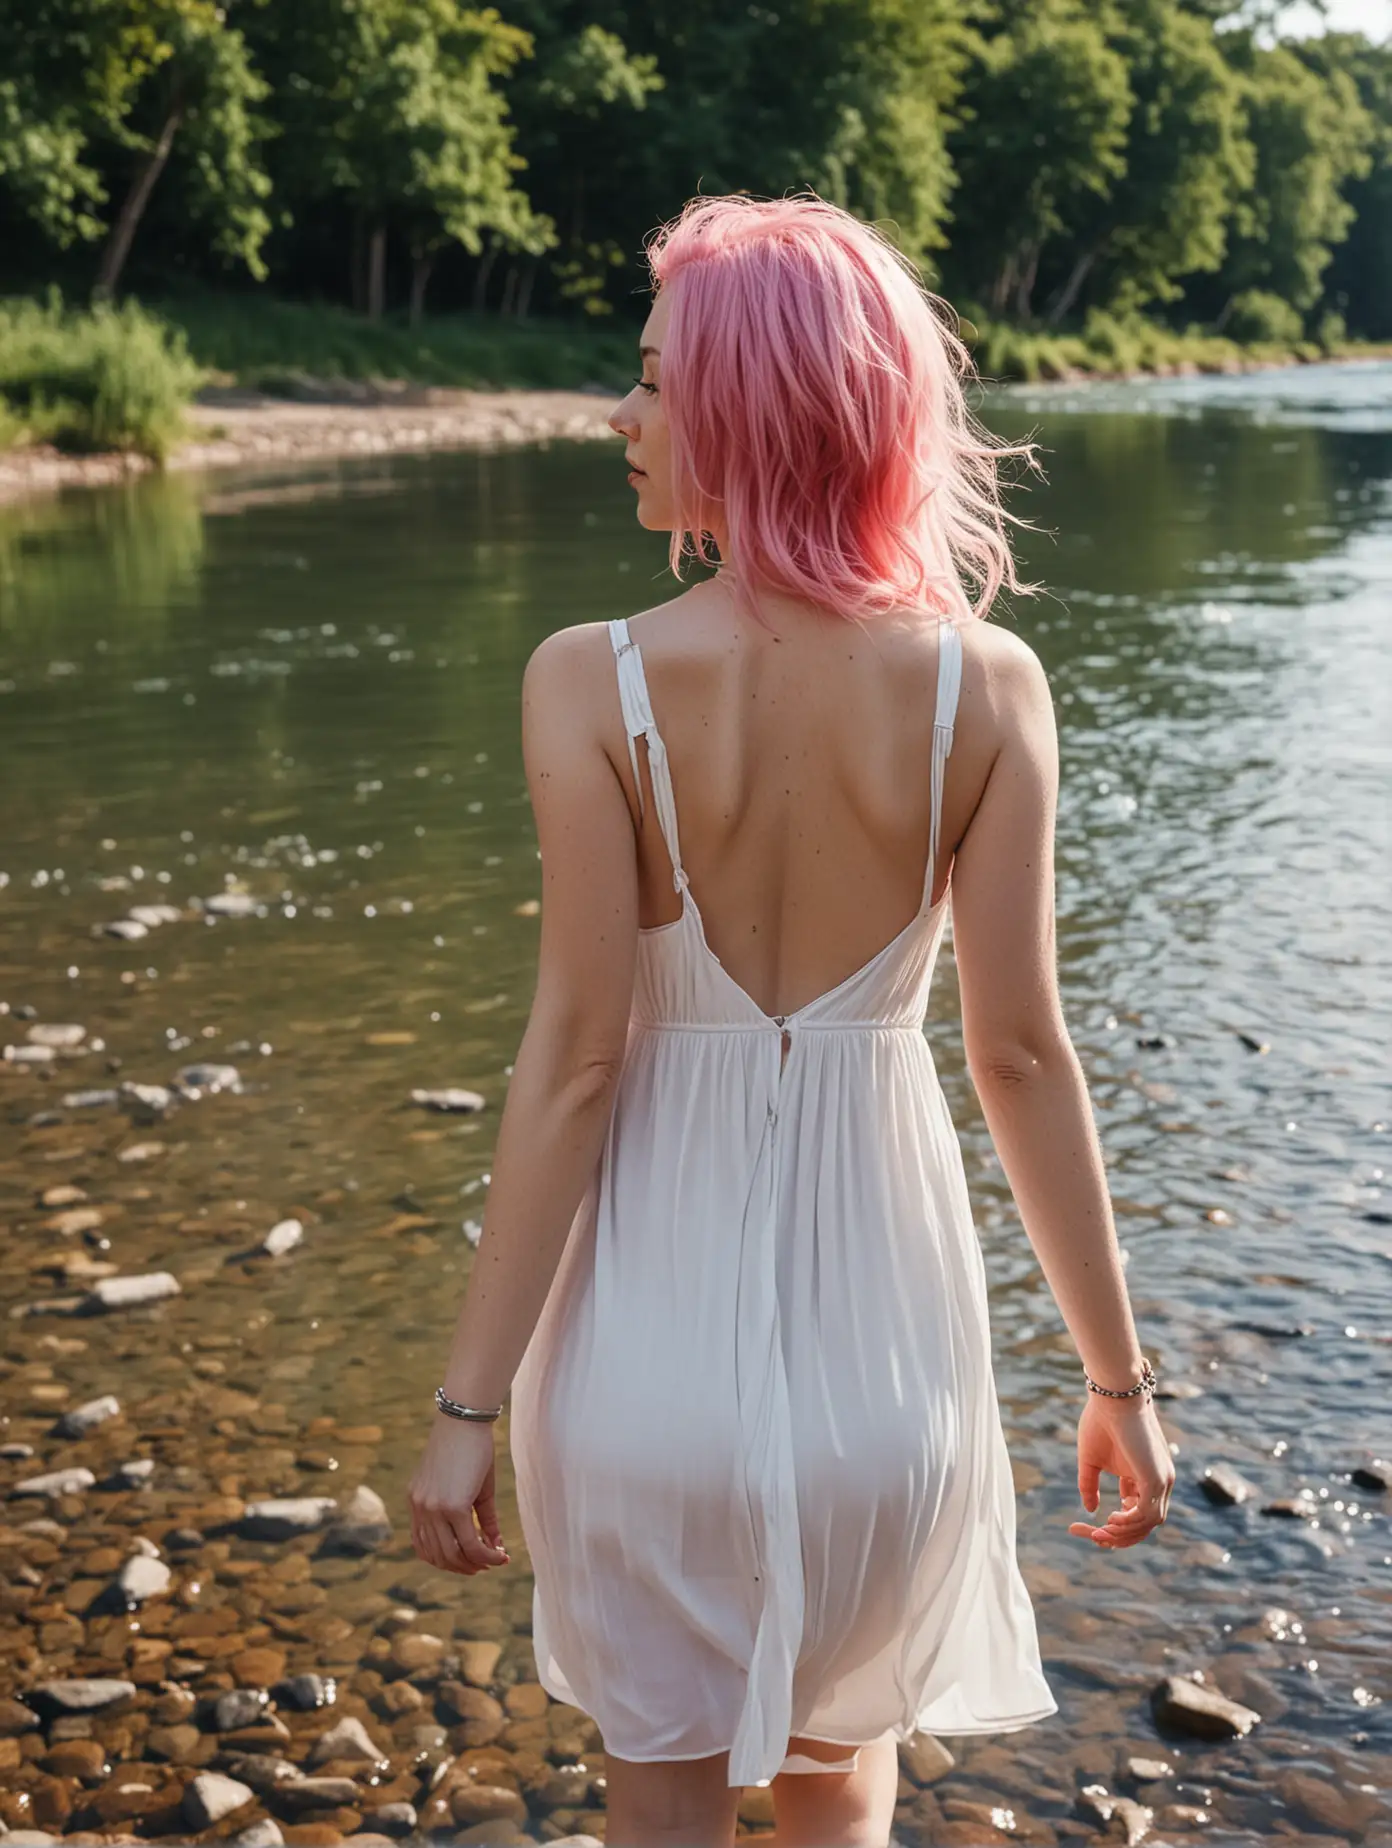 woman with pink hair walking by the river, wearing a white dress